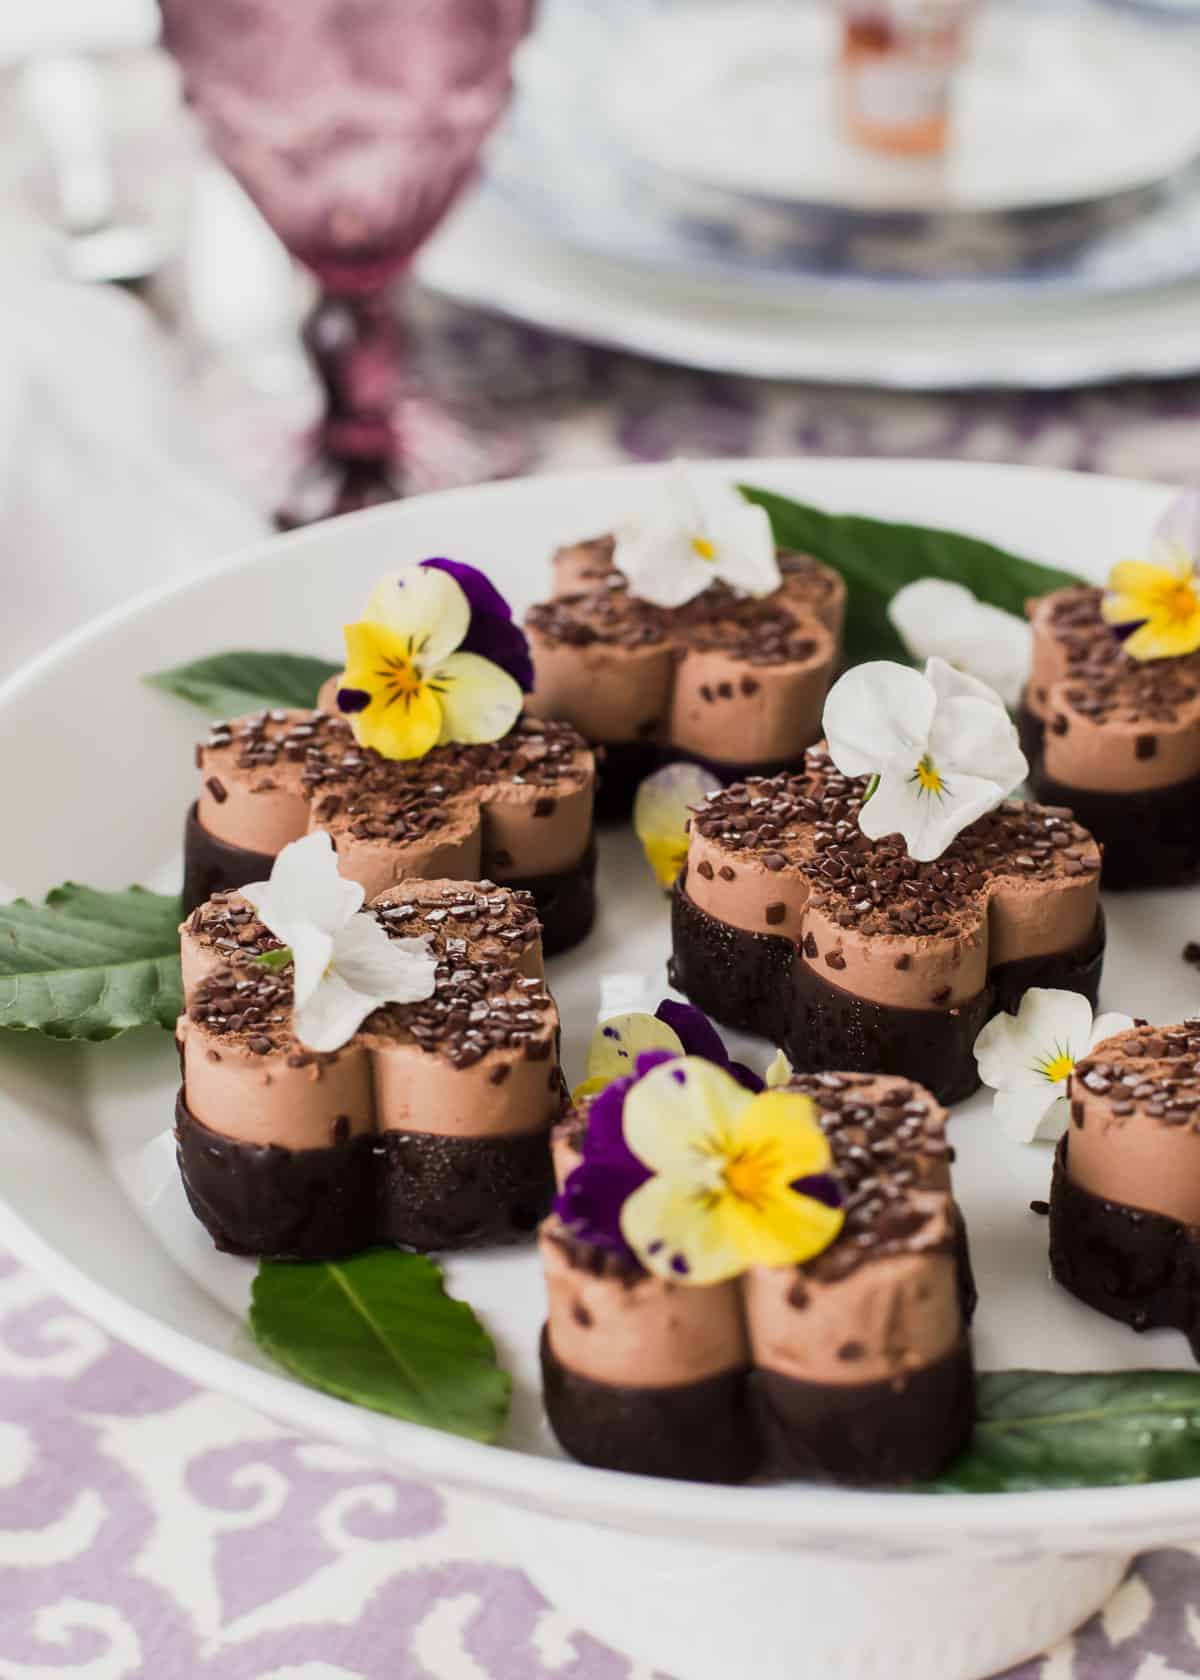 mini chocolate desserts with tiny edible flowers on top, on white platter.